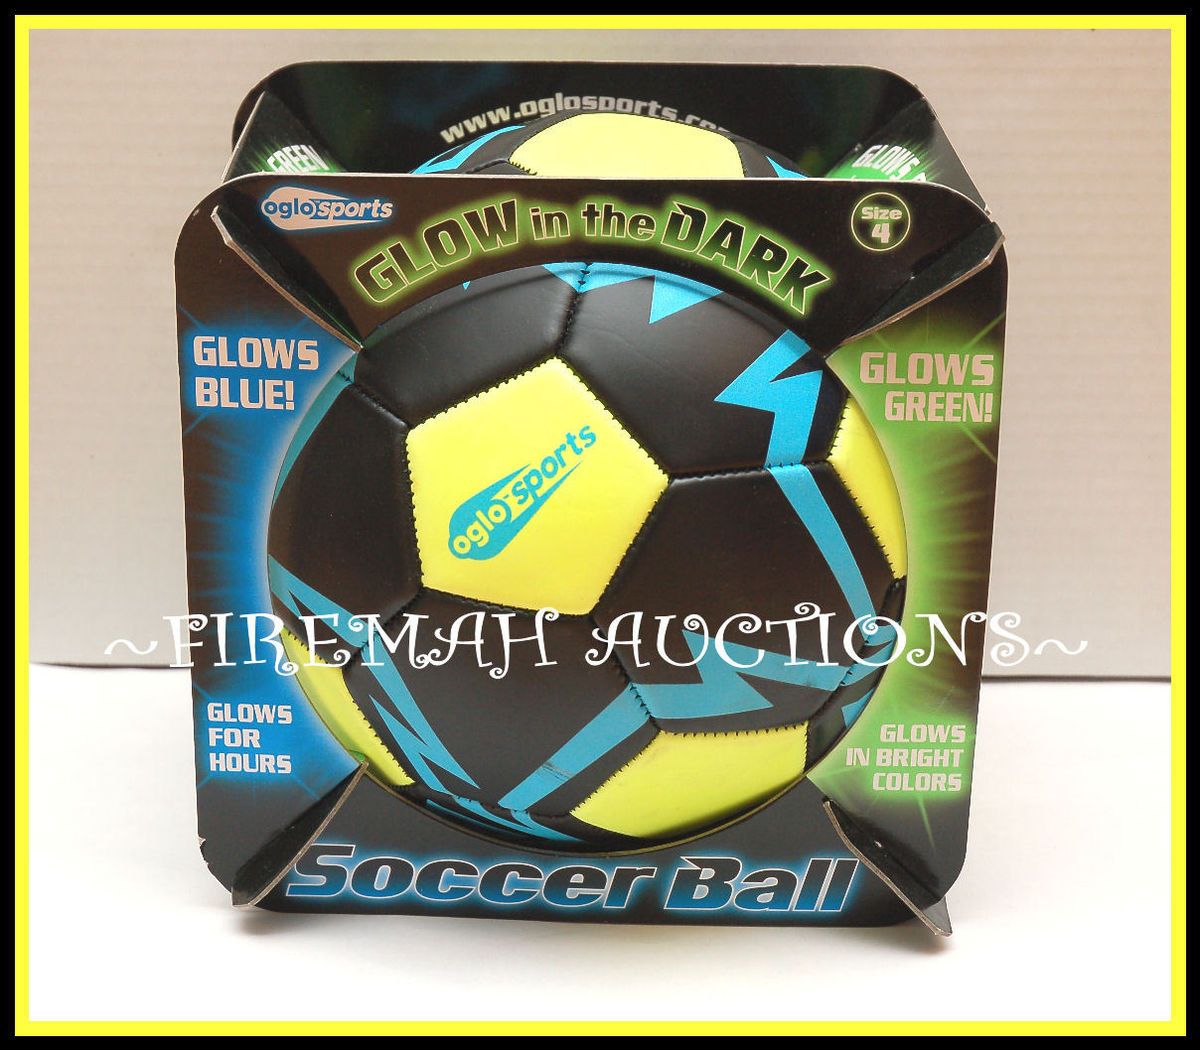 New Oglo Sports Glo Glow in The Dark Soccer Ball Green Glowing Colors